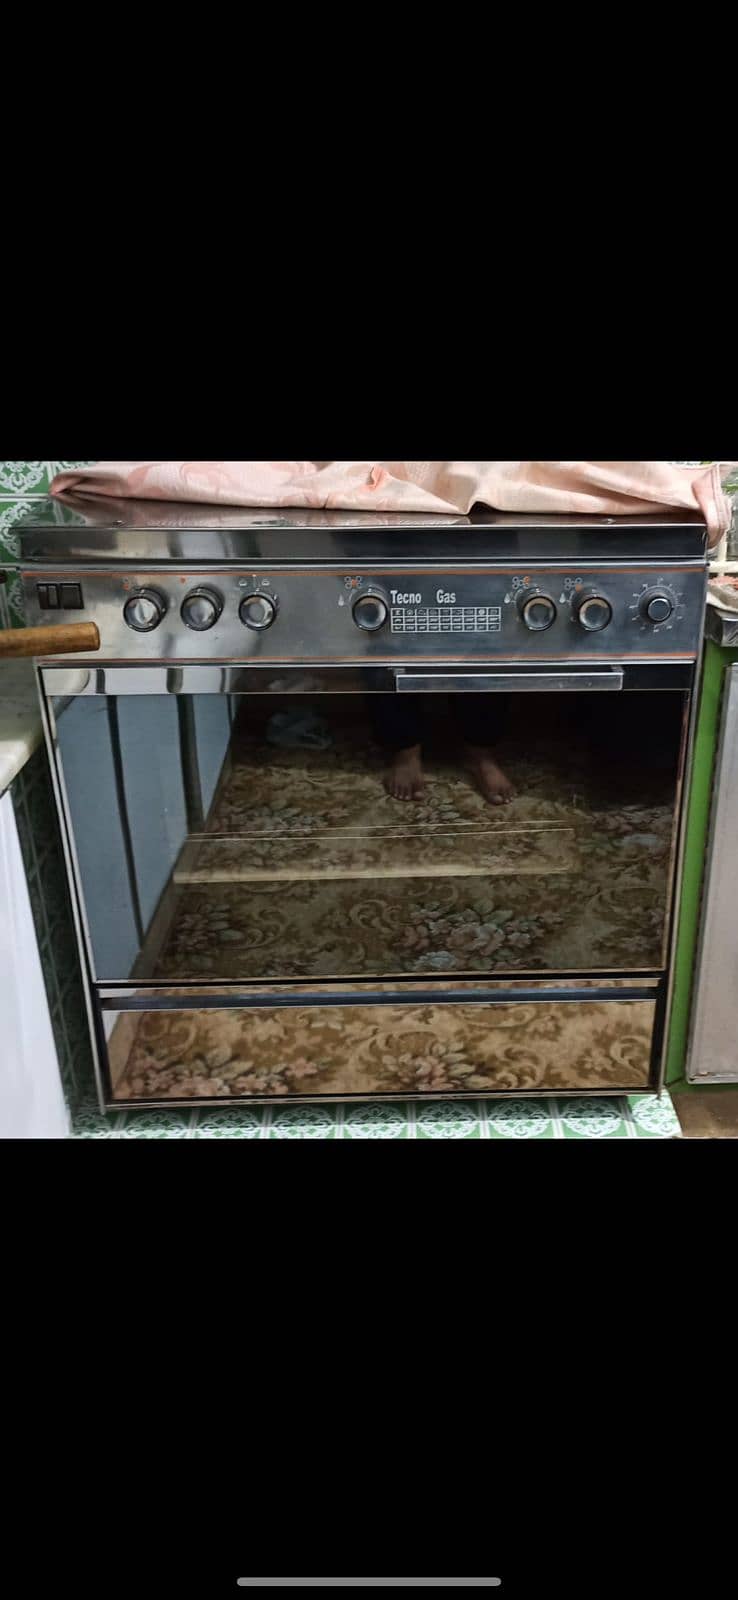 Pre-Loved Gas Oven: Bake Your Way to Deliciousness! 0